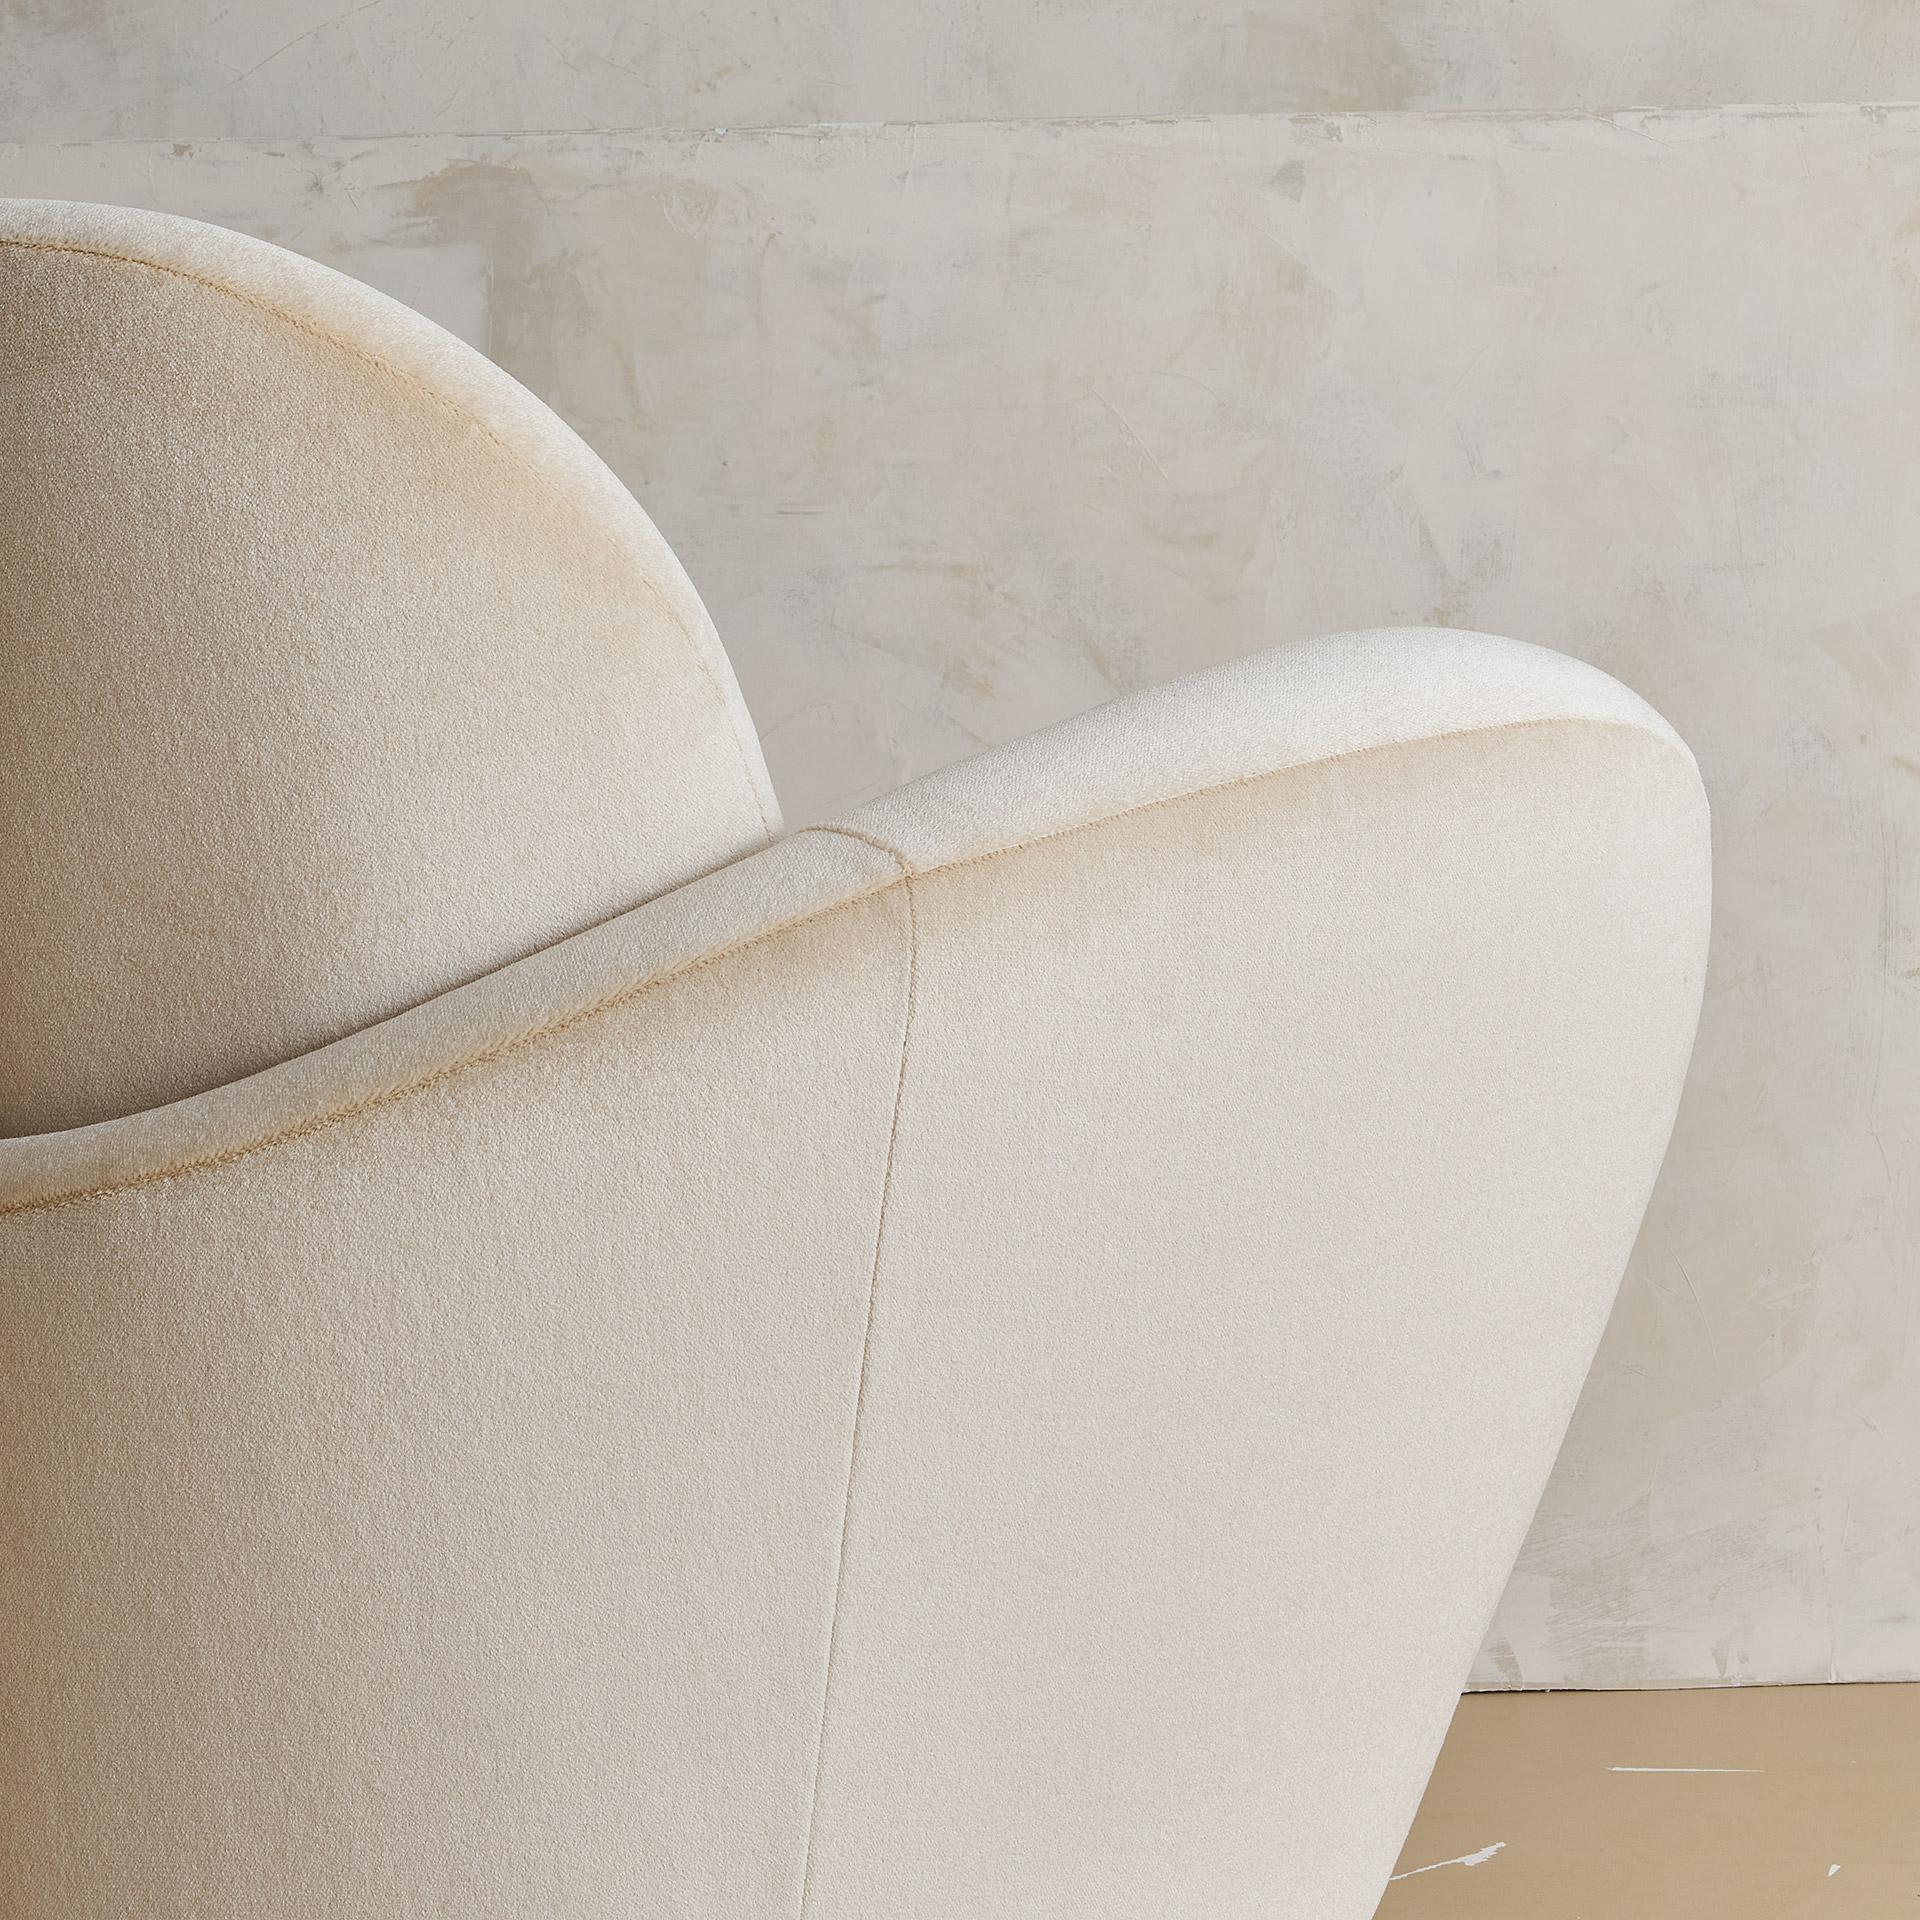 Wraparound Swivel Chair in the style of Vladimir Kagan in Ivory Mohair 4